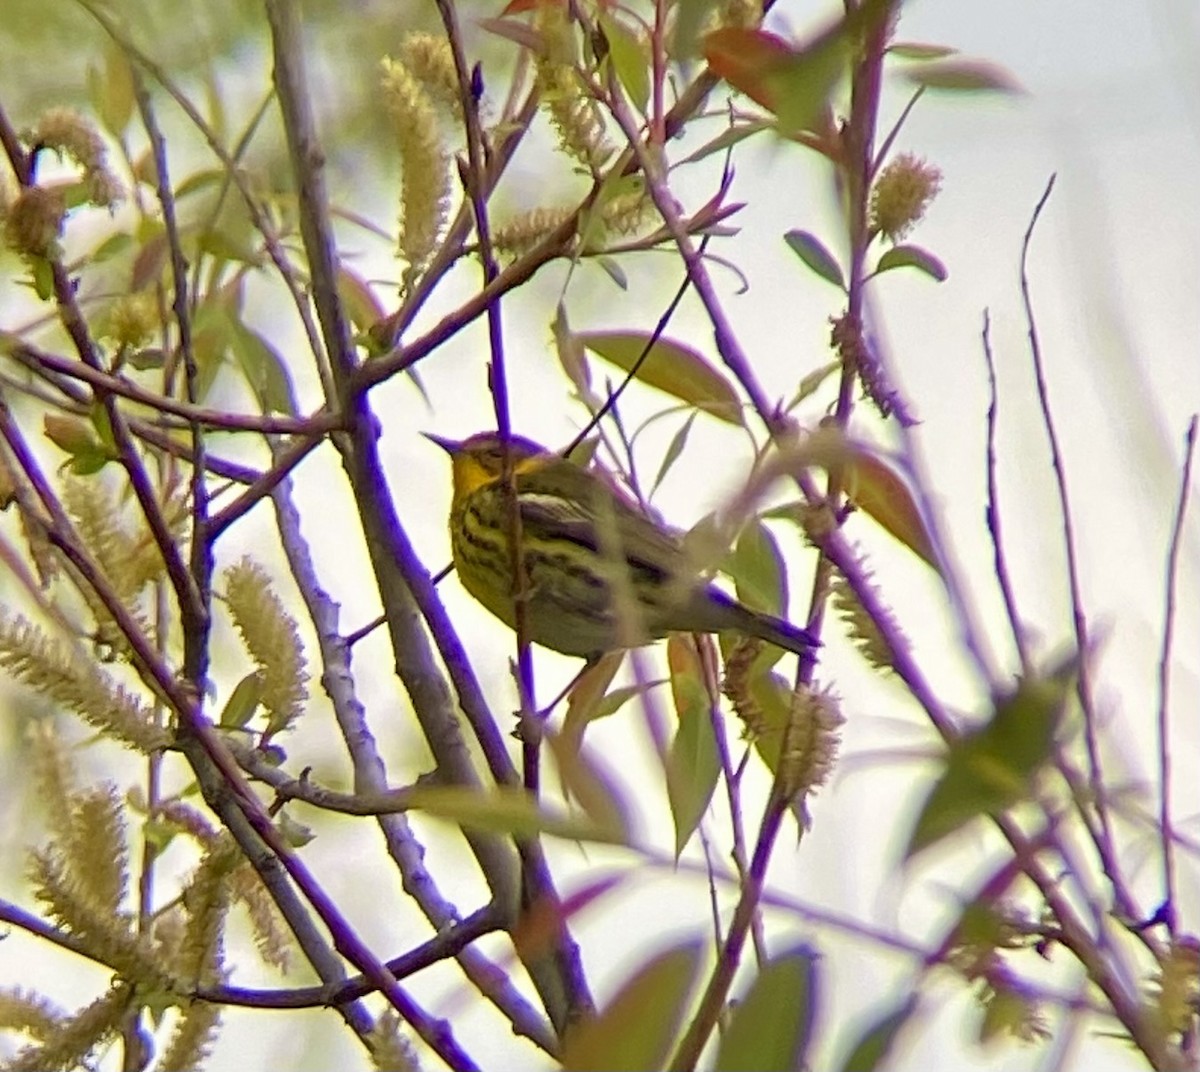 Cape May Warbler - Michael Onel